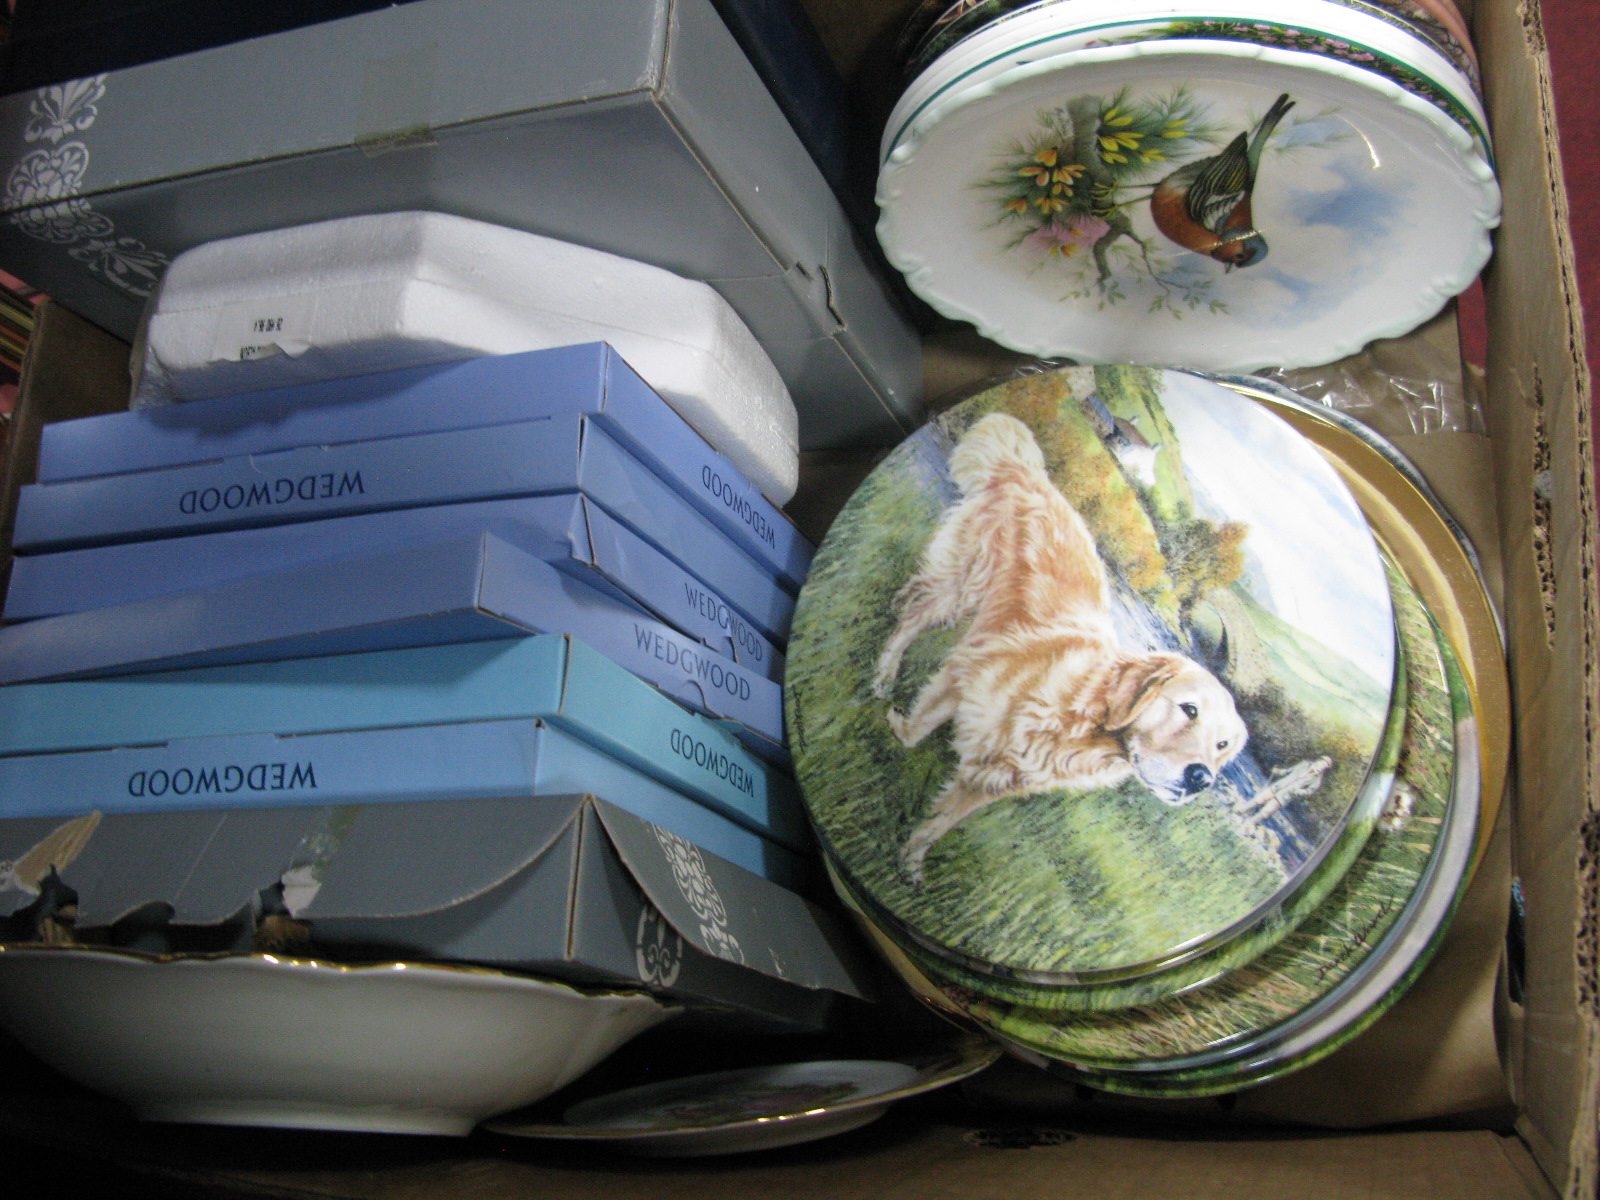 A Quantity of Wedgwood and Doulton Collectors Plates:- One Box